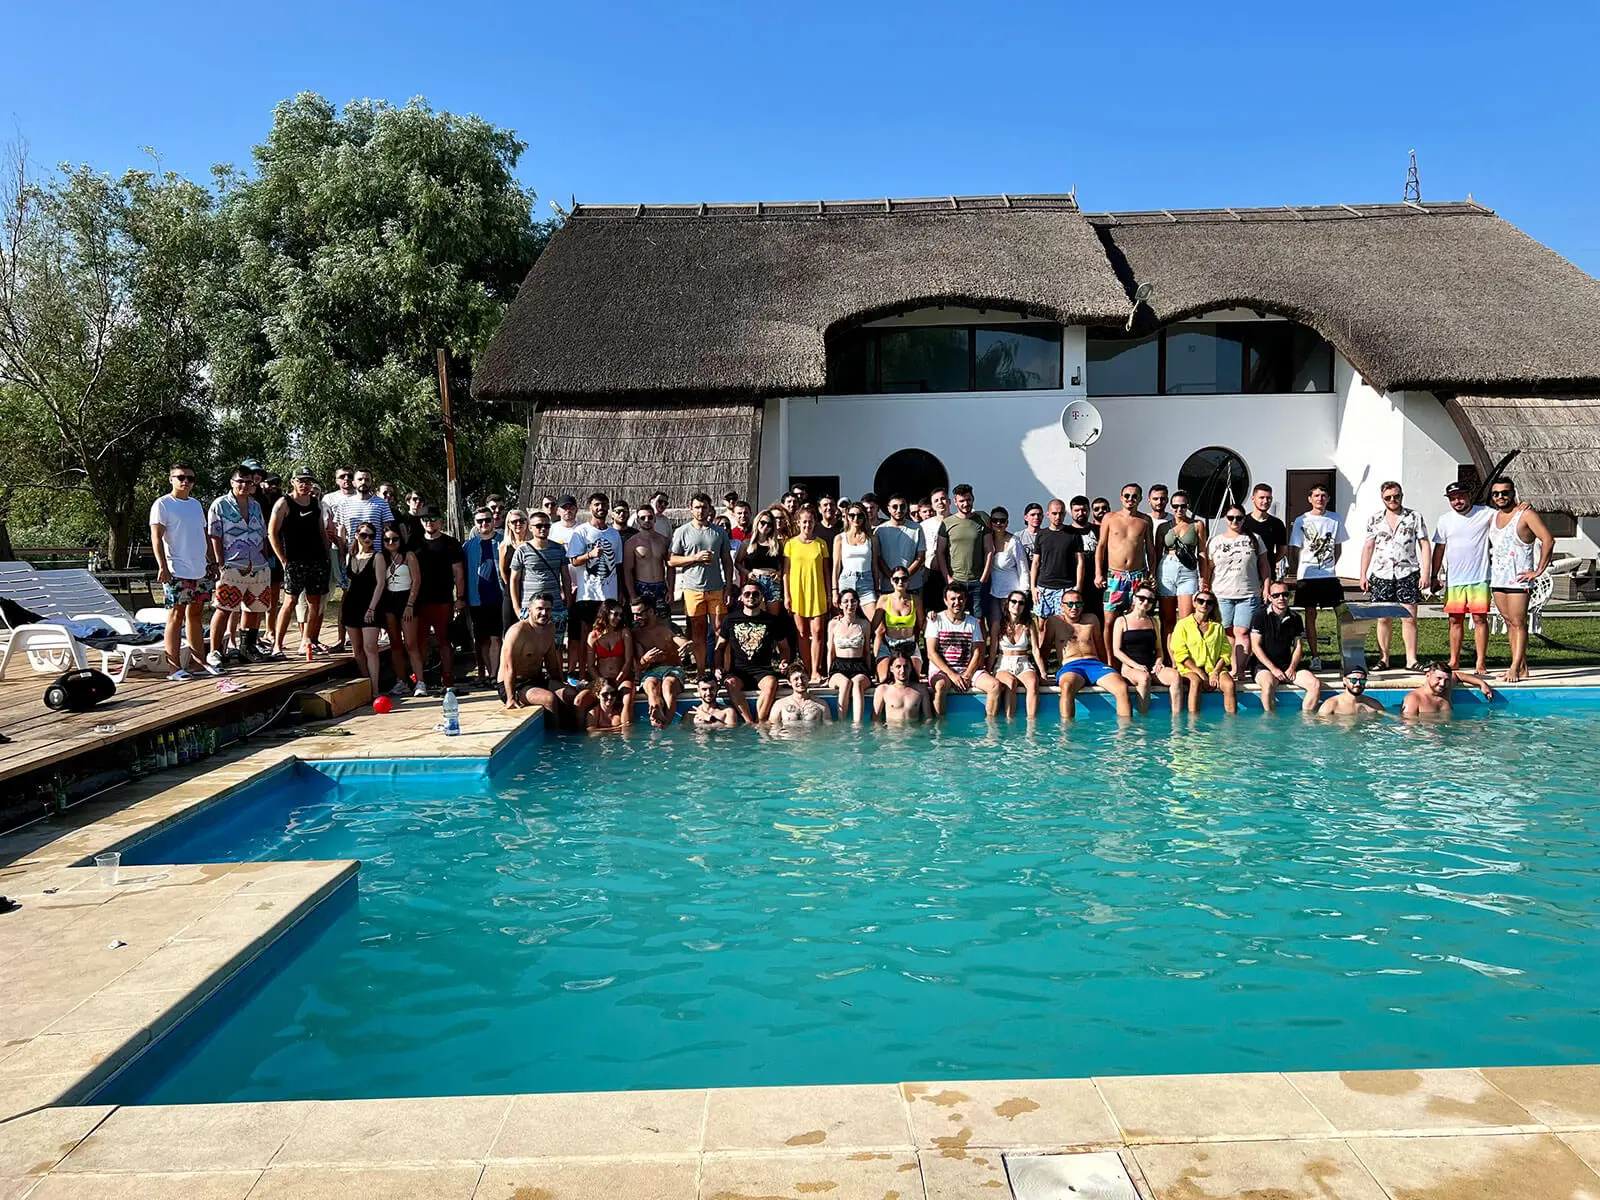 Web developers and digital specialists at a pool party